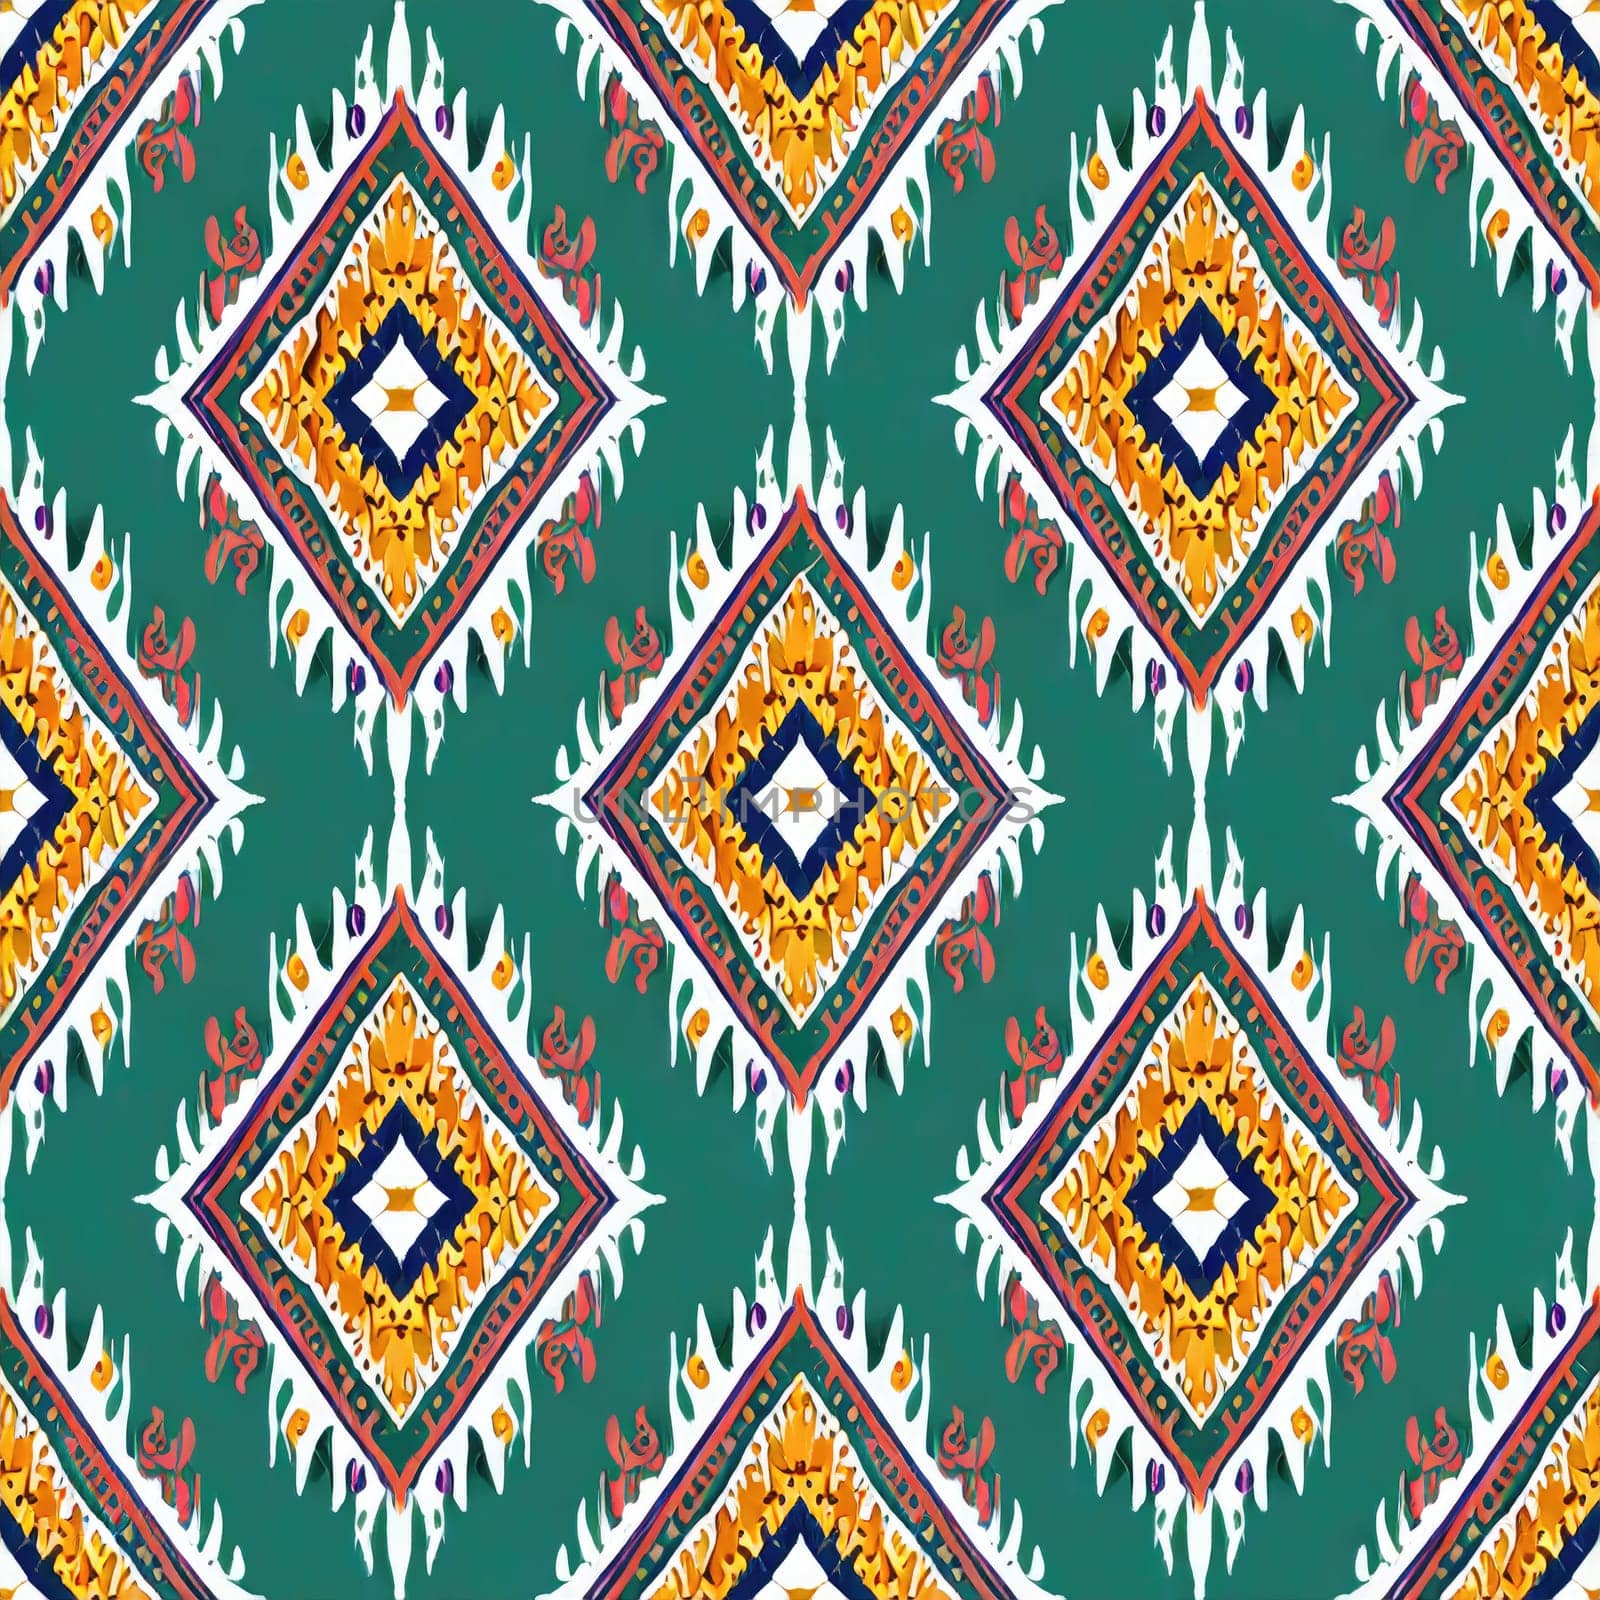  Ikat ethnic abstract beautiful art. Ikat seamless pattern in tribal, folk embroidery. by PeaceYAY